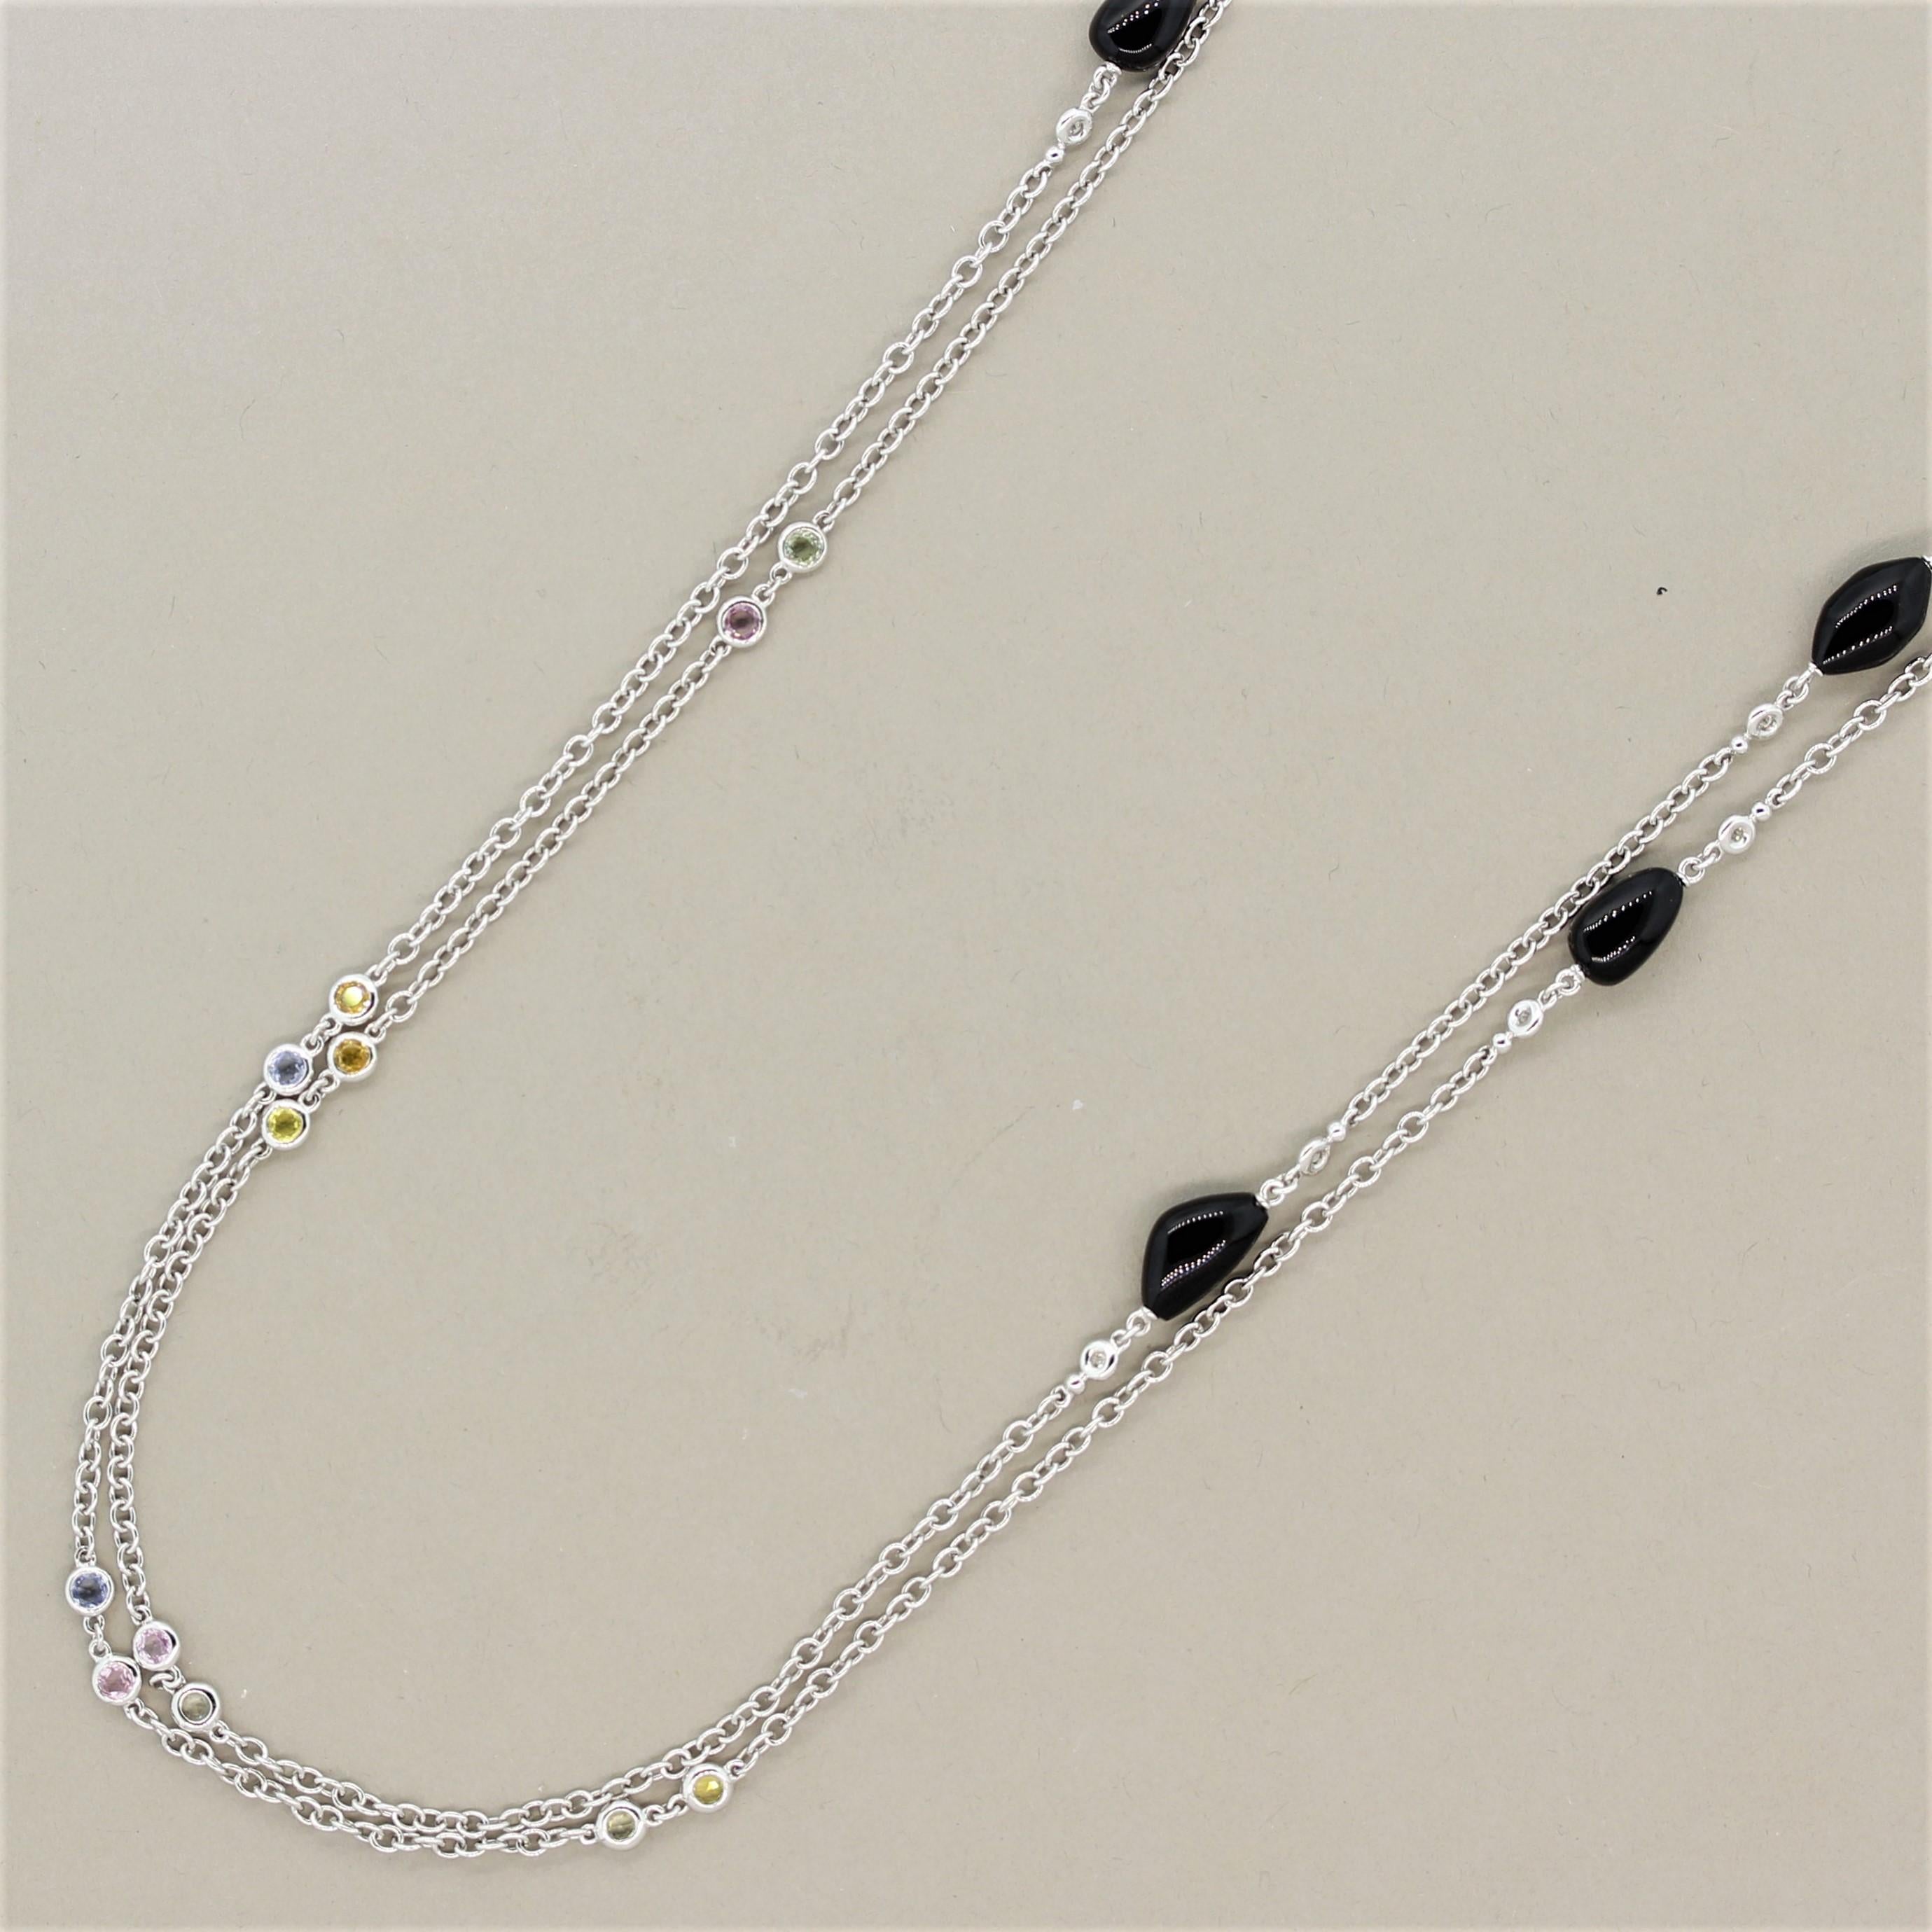 A unique necklace measuring 60 inches designed to wear long or looped over itself for a shorter double strand look. It features 10 black onyx beads with a smooth polish. Each onyx has 2 round brilliant cut diamonds bezel set on its sides. Adding to